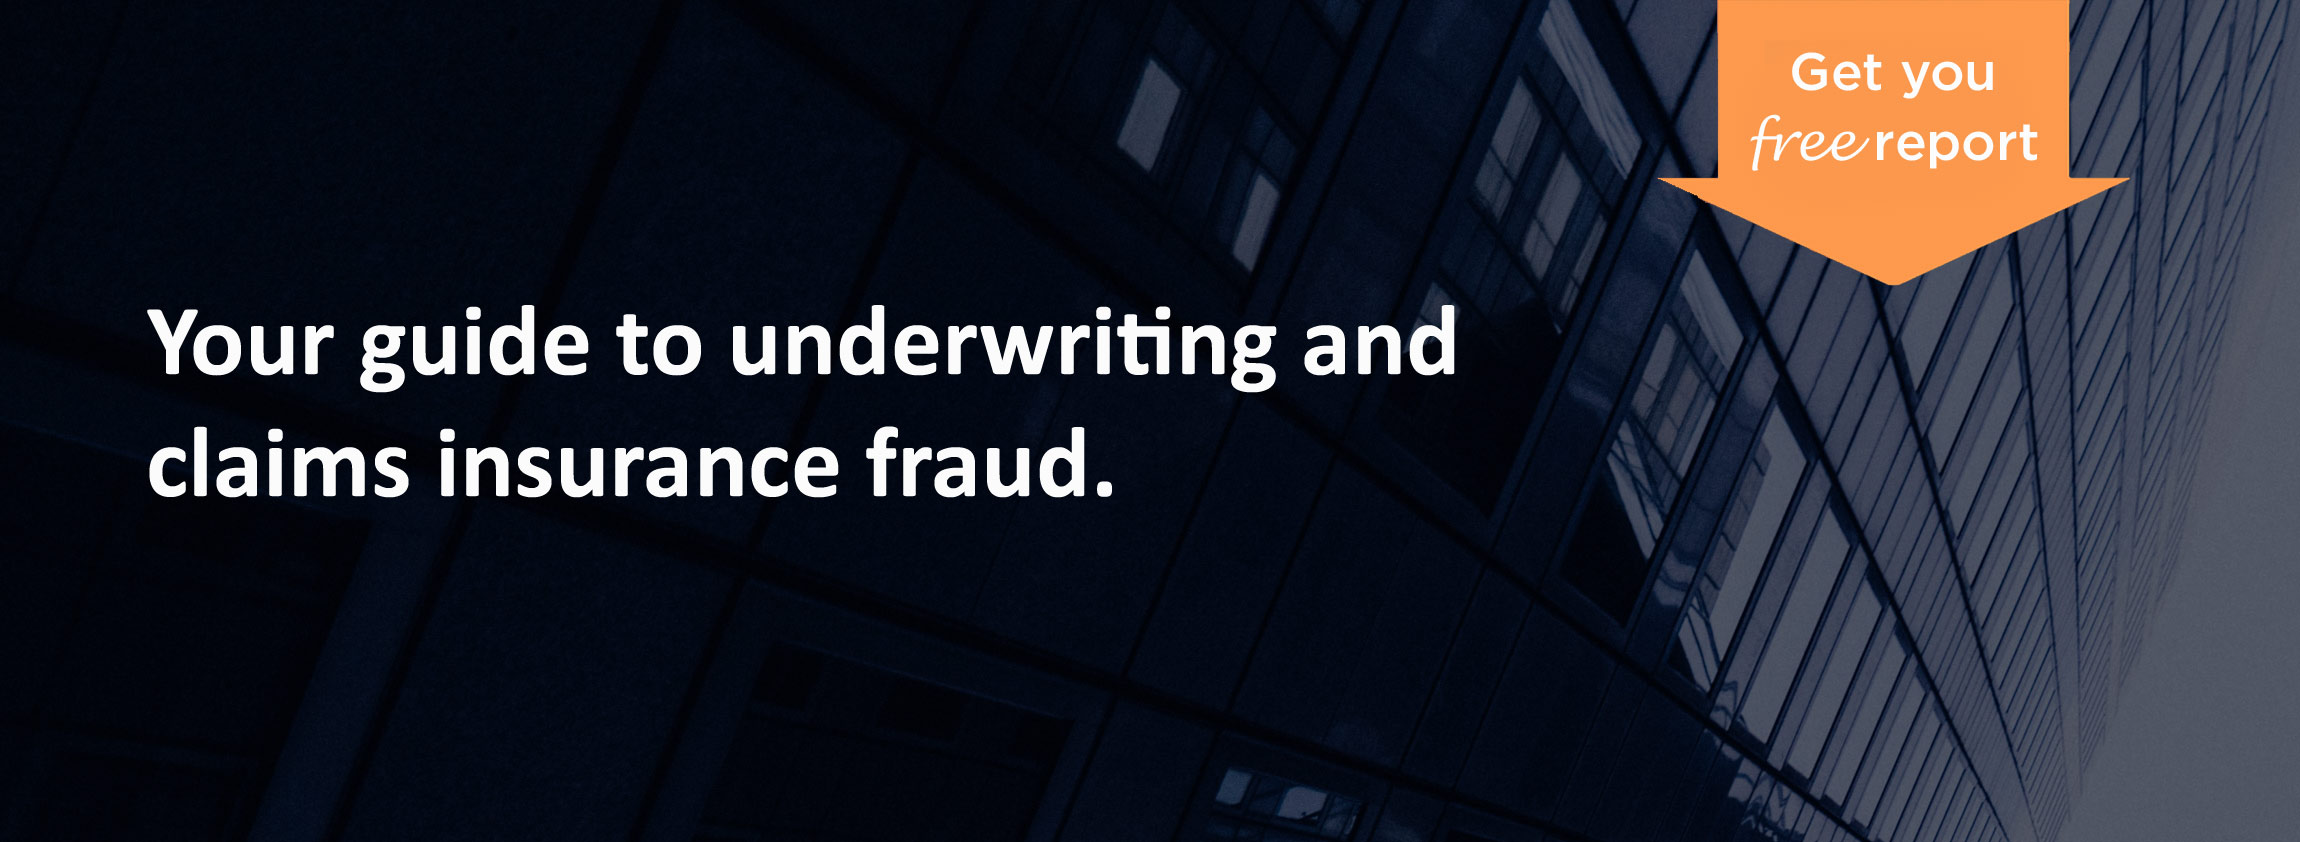 guide-underwriting-claims-insurance-fraud-landing